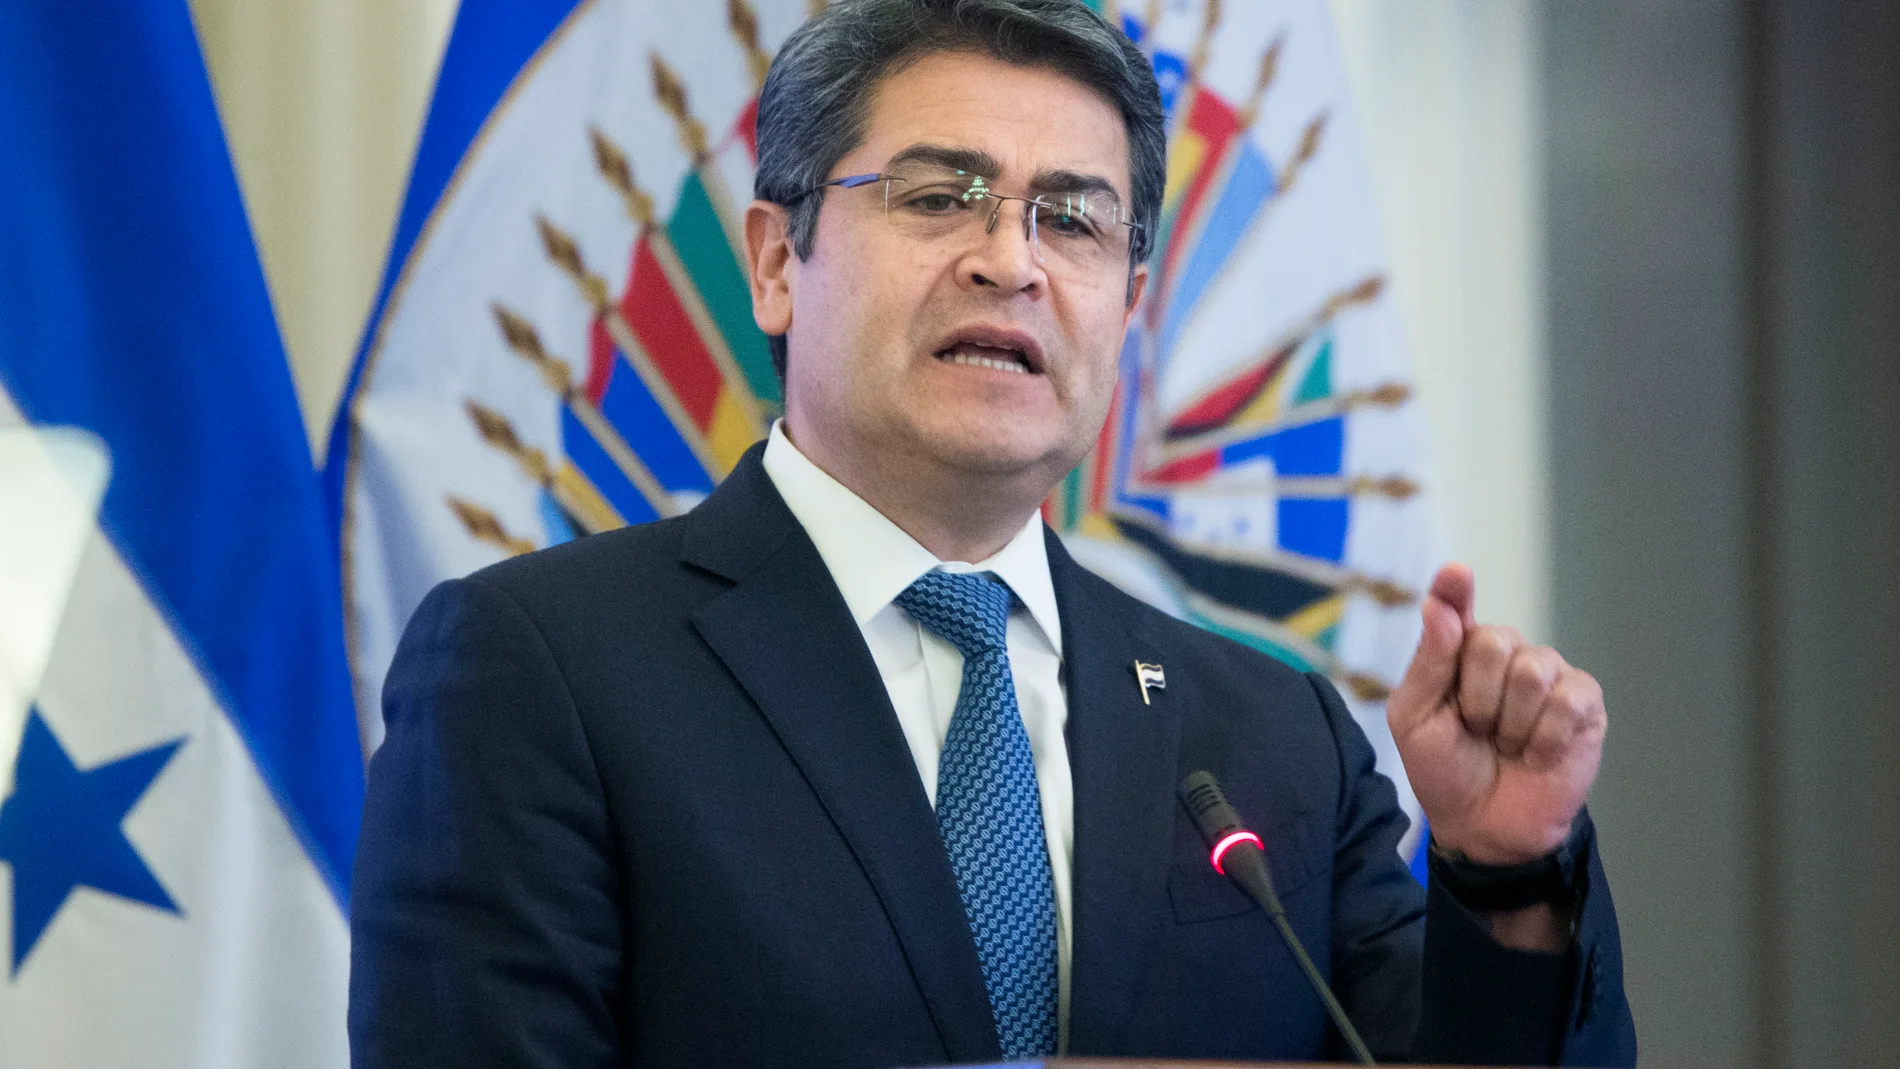 Washington (United States), 28/02/2019.- (FILE) President of Honduras Juan Orlando Hernandez delivers remarks during an official meeting hosted by the Permanent Council of the Organization of American States (OAS), at the OAS in Washington, DC, USA, 28 February 2019 (reissued 09 March 2021). The US federal prosecutor's office opened the trial on 09 March 2021 against the alleged Honduran drug trafficker Geovanny Fuentes Ramirez, assuring that he collaborated for years with the current Honduran president, Juan Orlando Hernandez, and describing Honduras as a 'narco-state.' (Abierto, Estados Unidos) EFE/EPA/MICHAEL REYNOLDS *** Local Caption *** 55021206